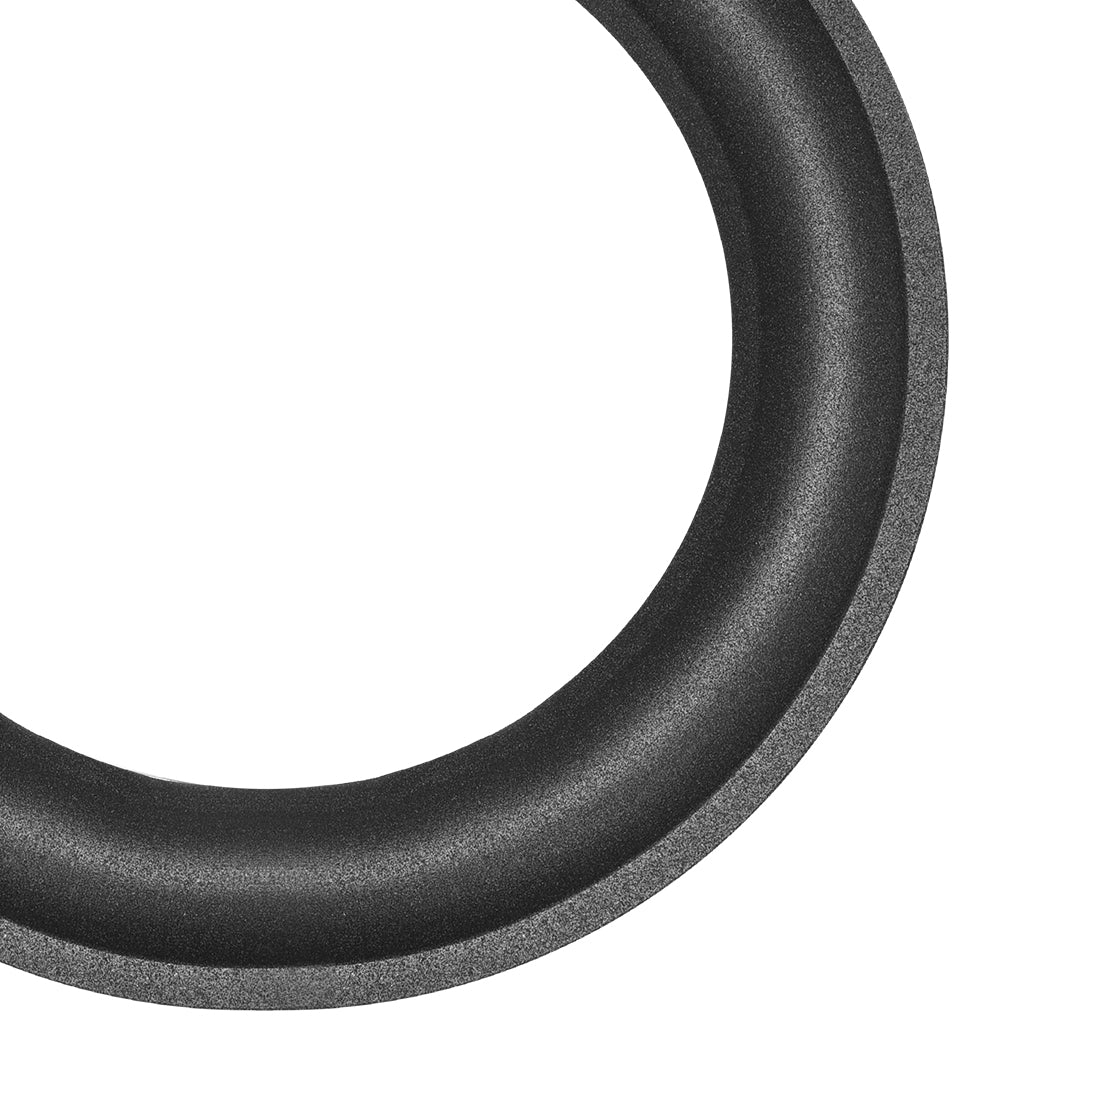 uxcell Uxcell 6.5" 6.5 inches Speaker Foam Edge Surround Rings Replacement Parts for Speaker Repair or DIY